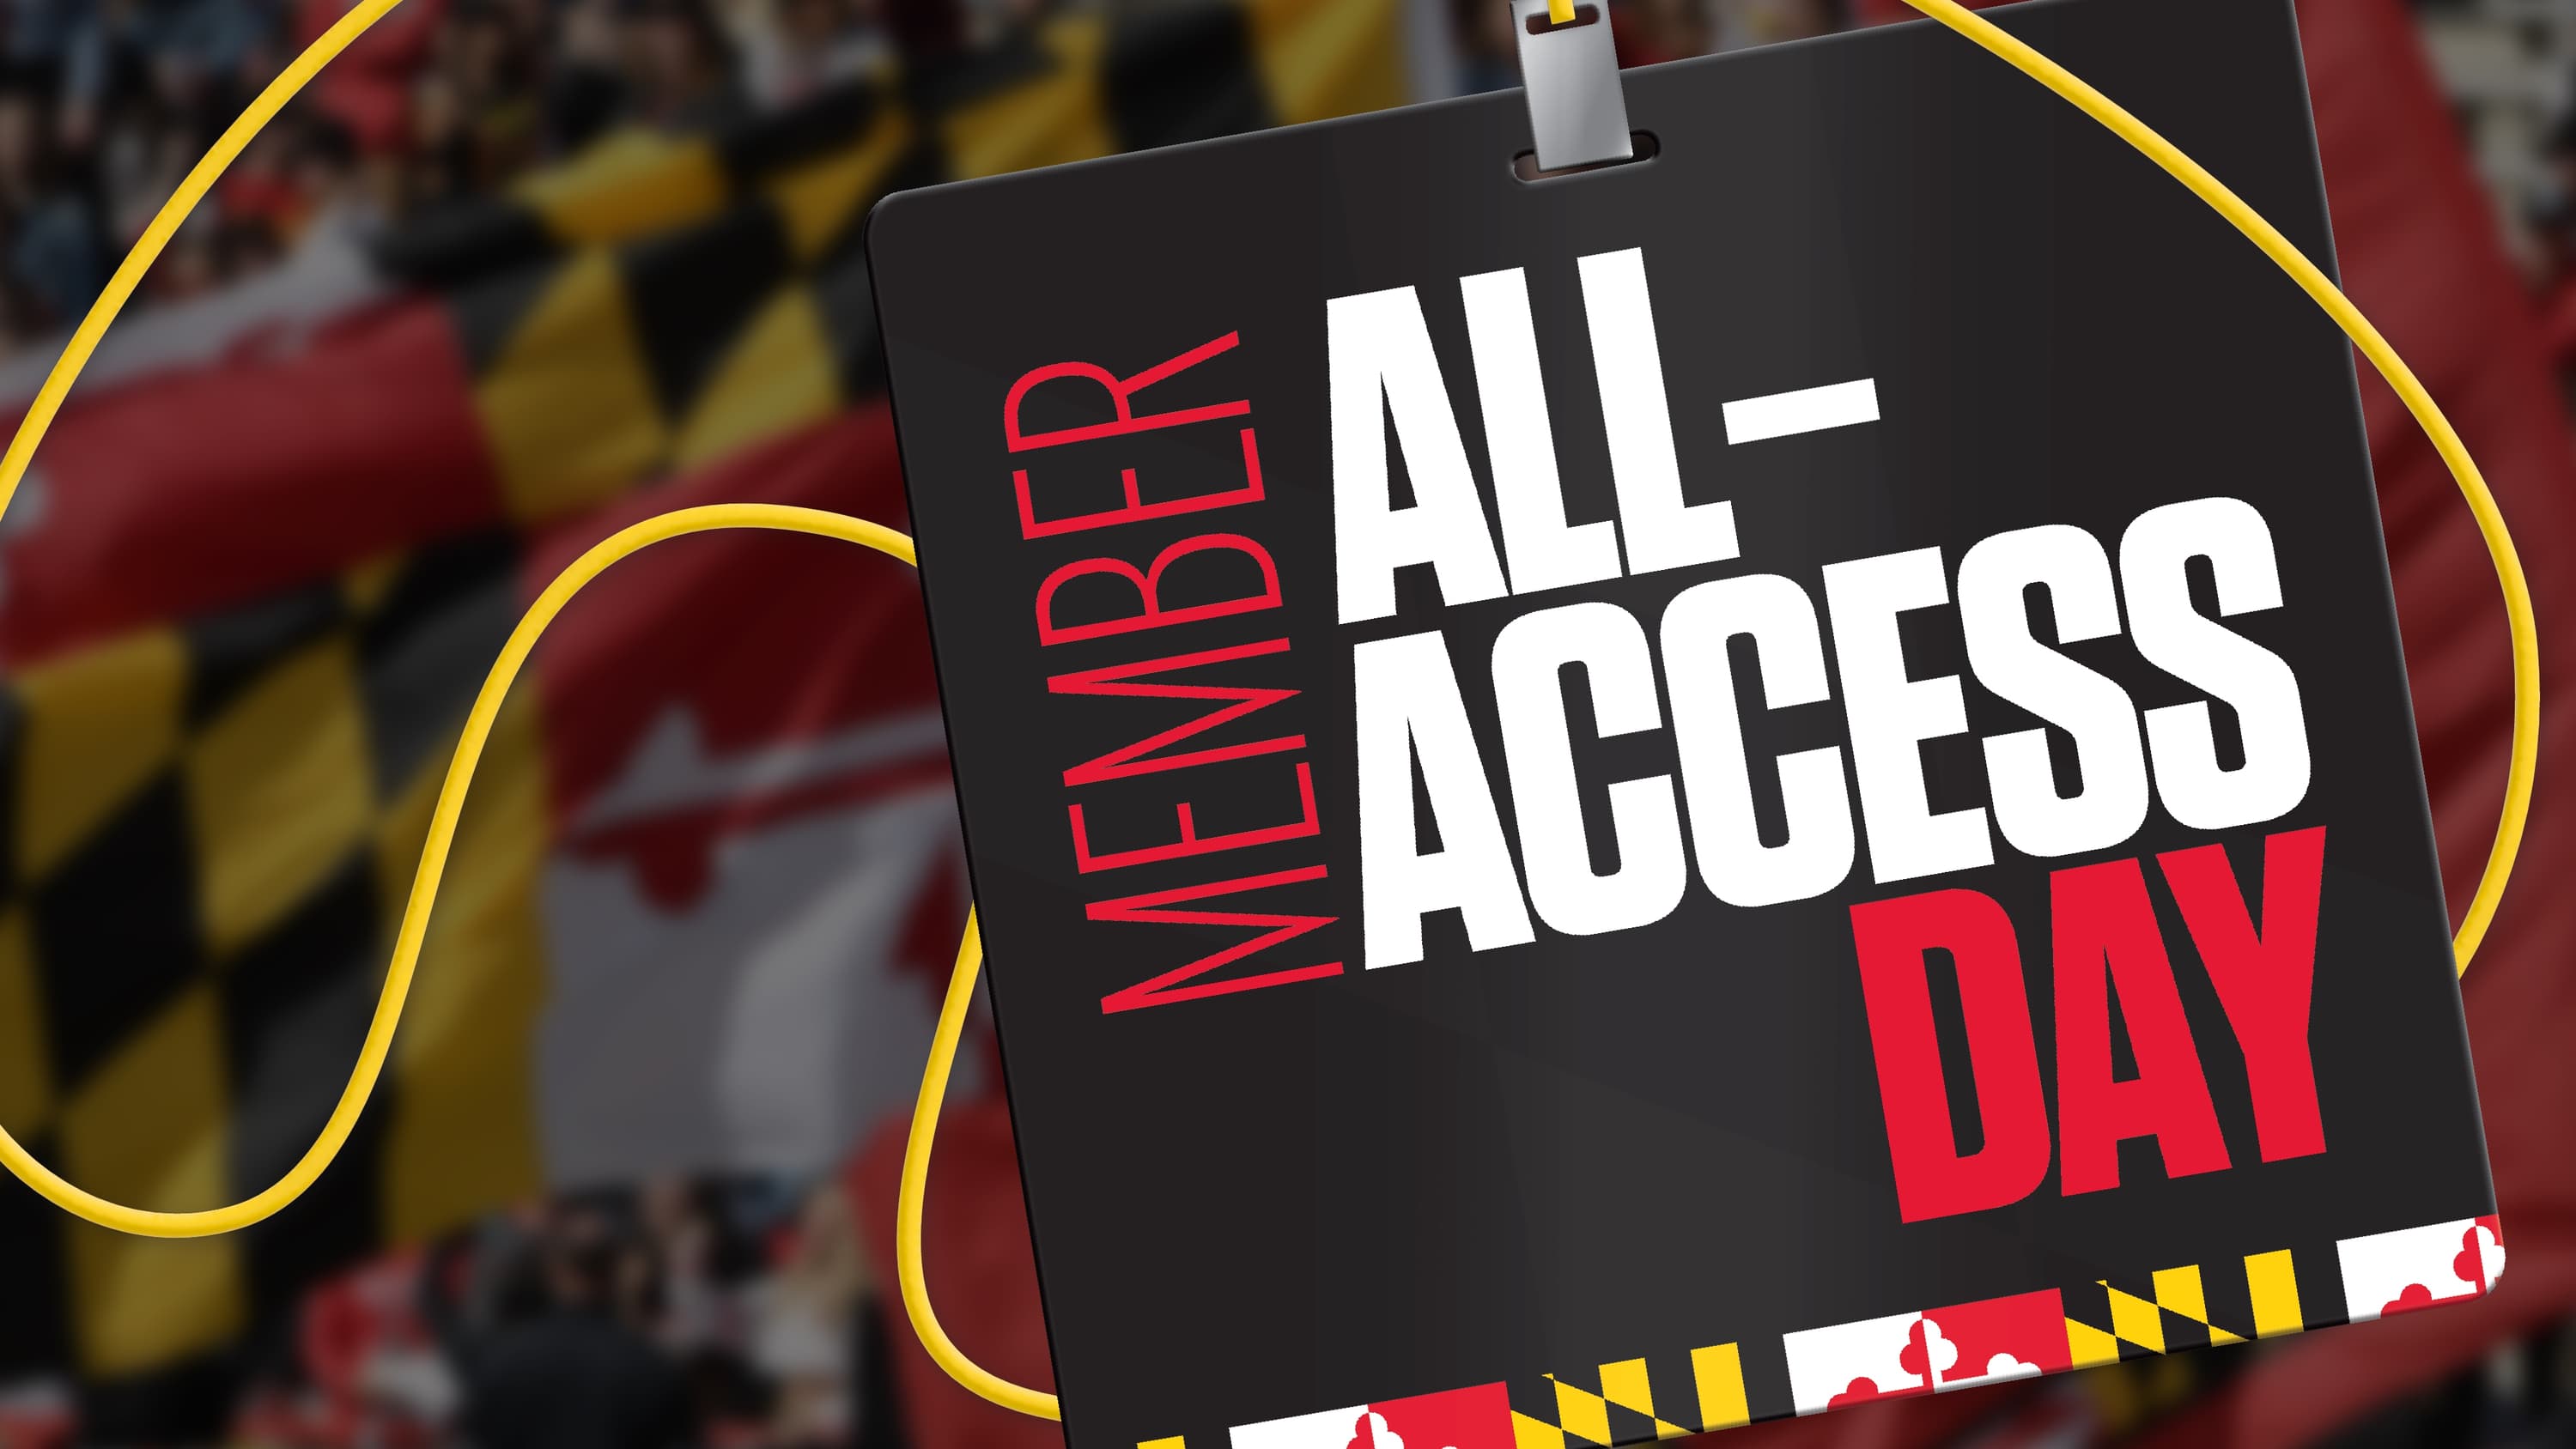 Member All-Access Day